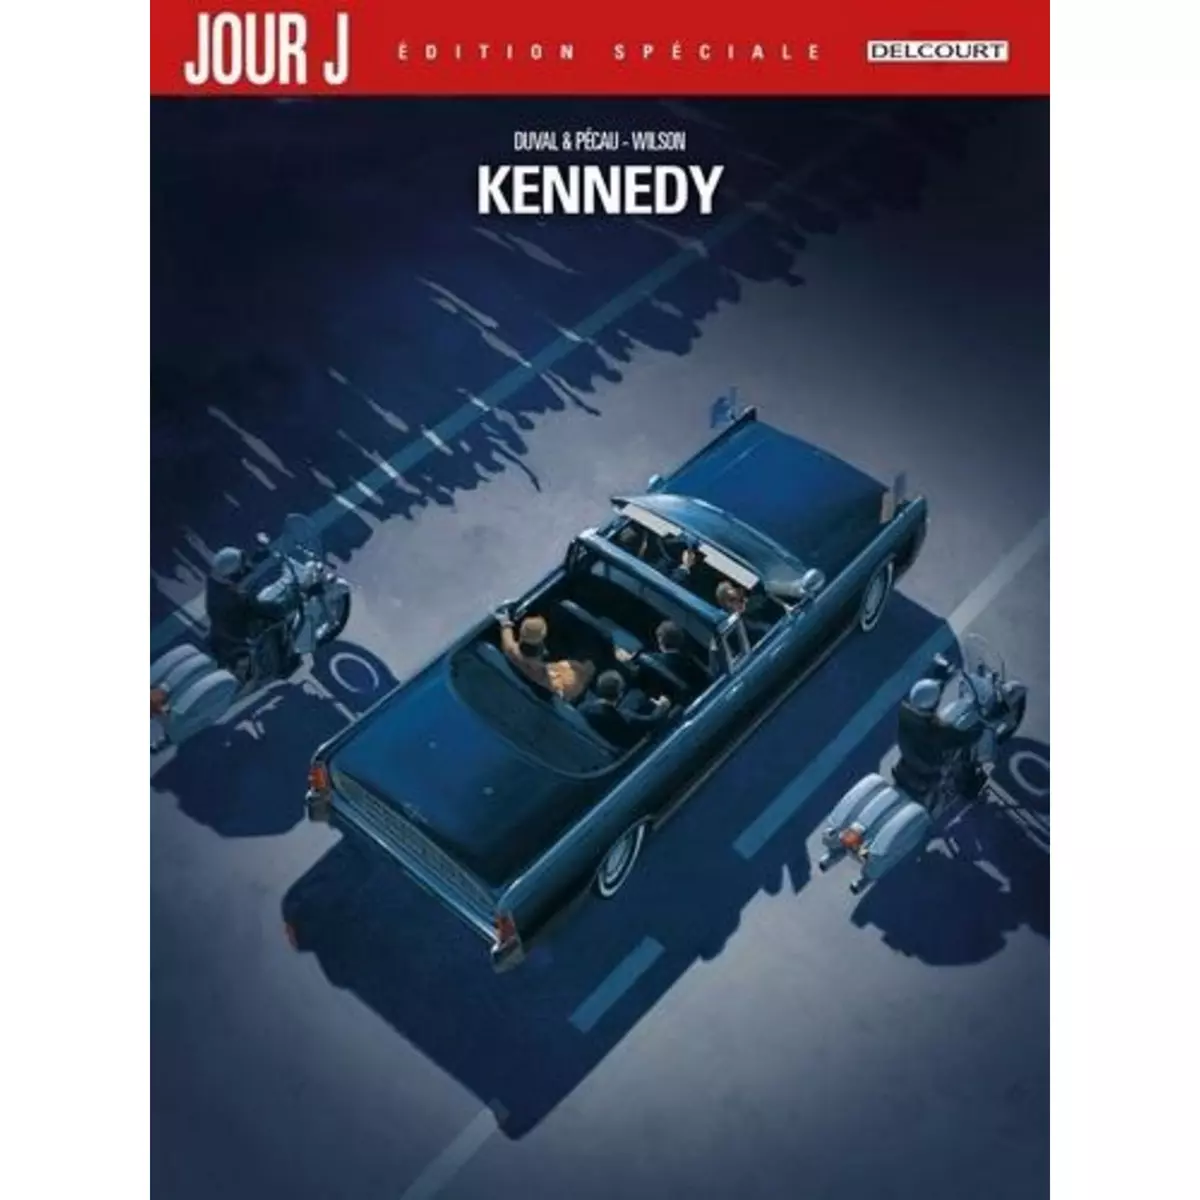  JOUR J : KENNEDY. EDITION SPECIALE, Duval Fred